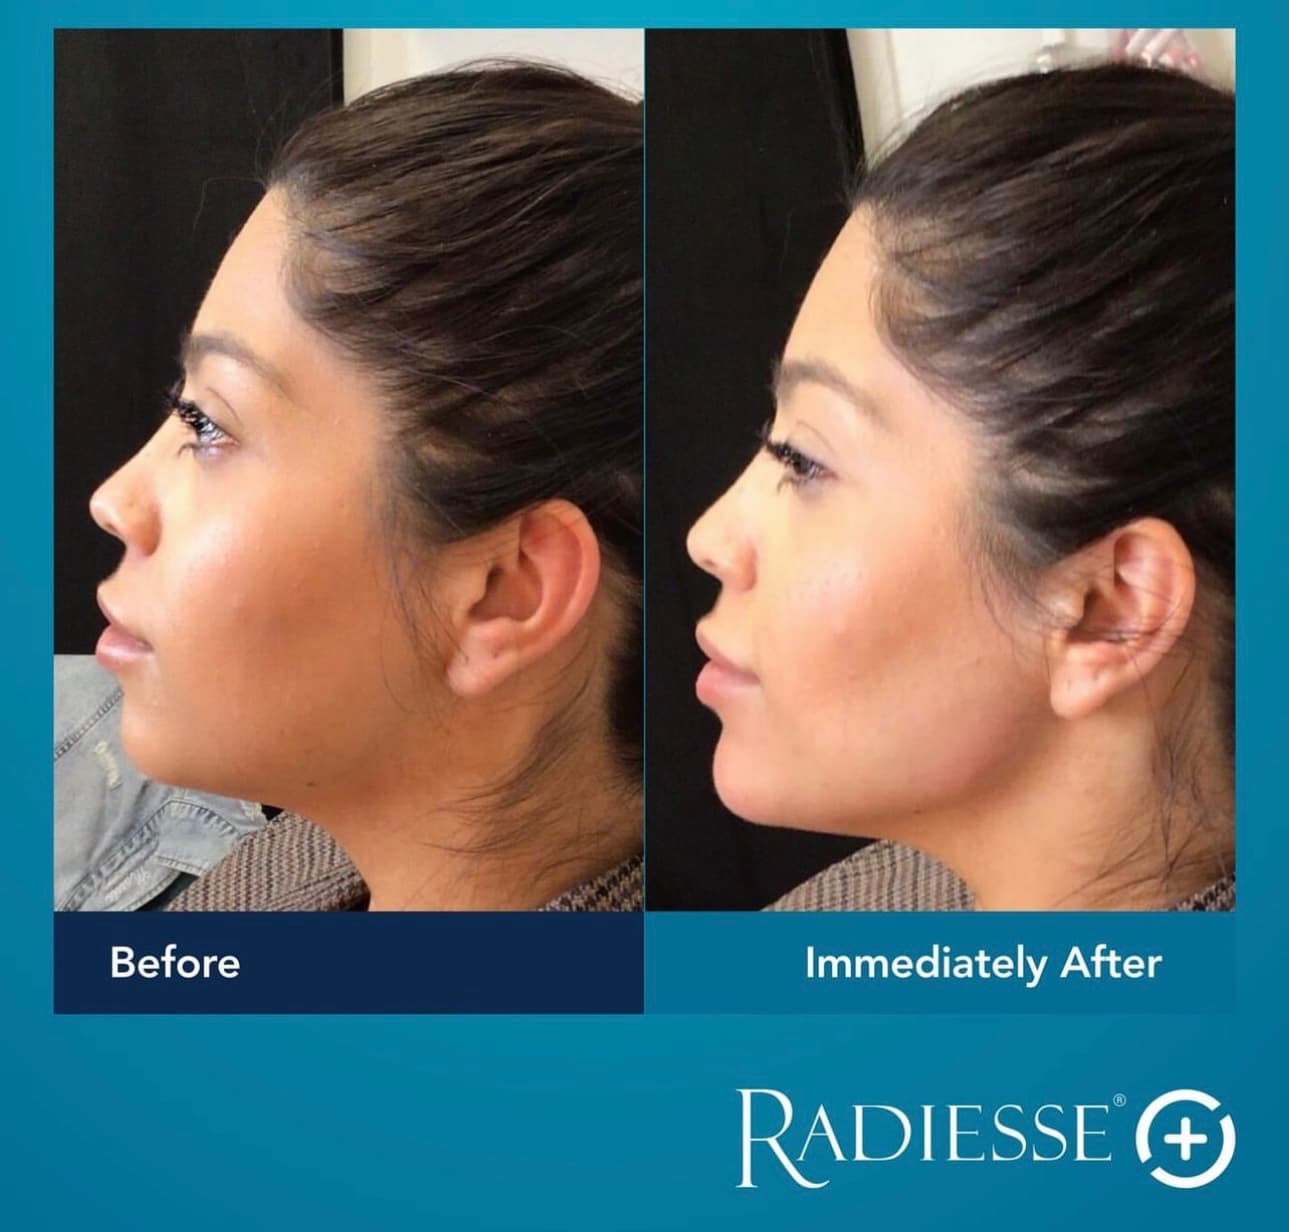 Radiesse Norwich Norfolk lower face rejuvenation jawline and chin female before and after